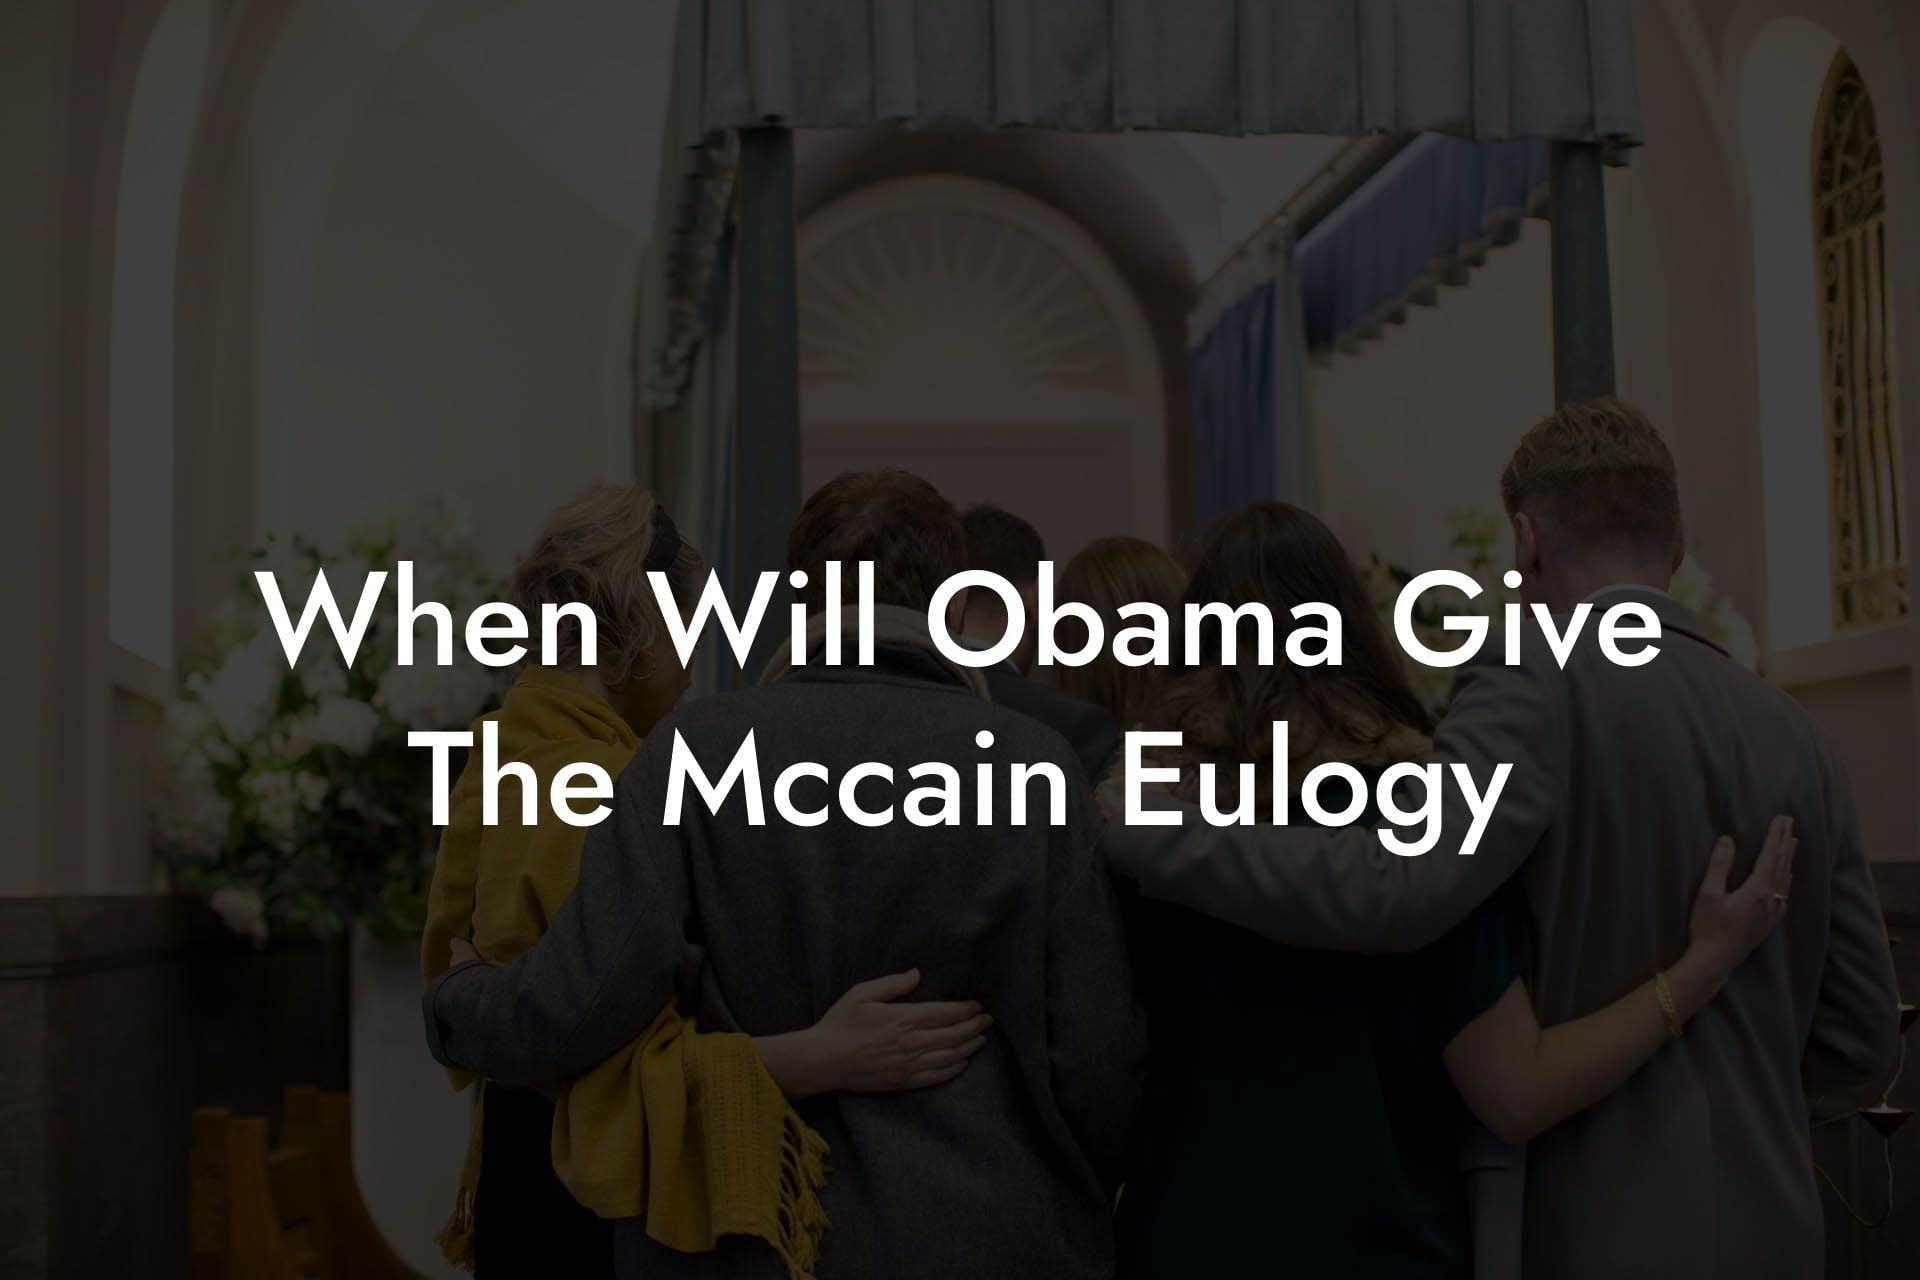 When Will Obama Give The Mccain Eulogy